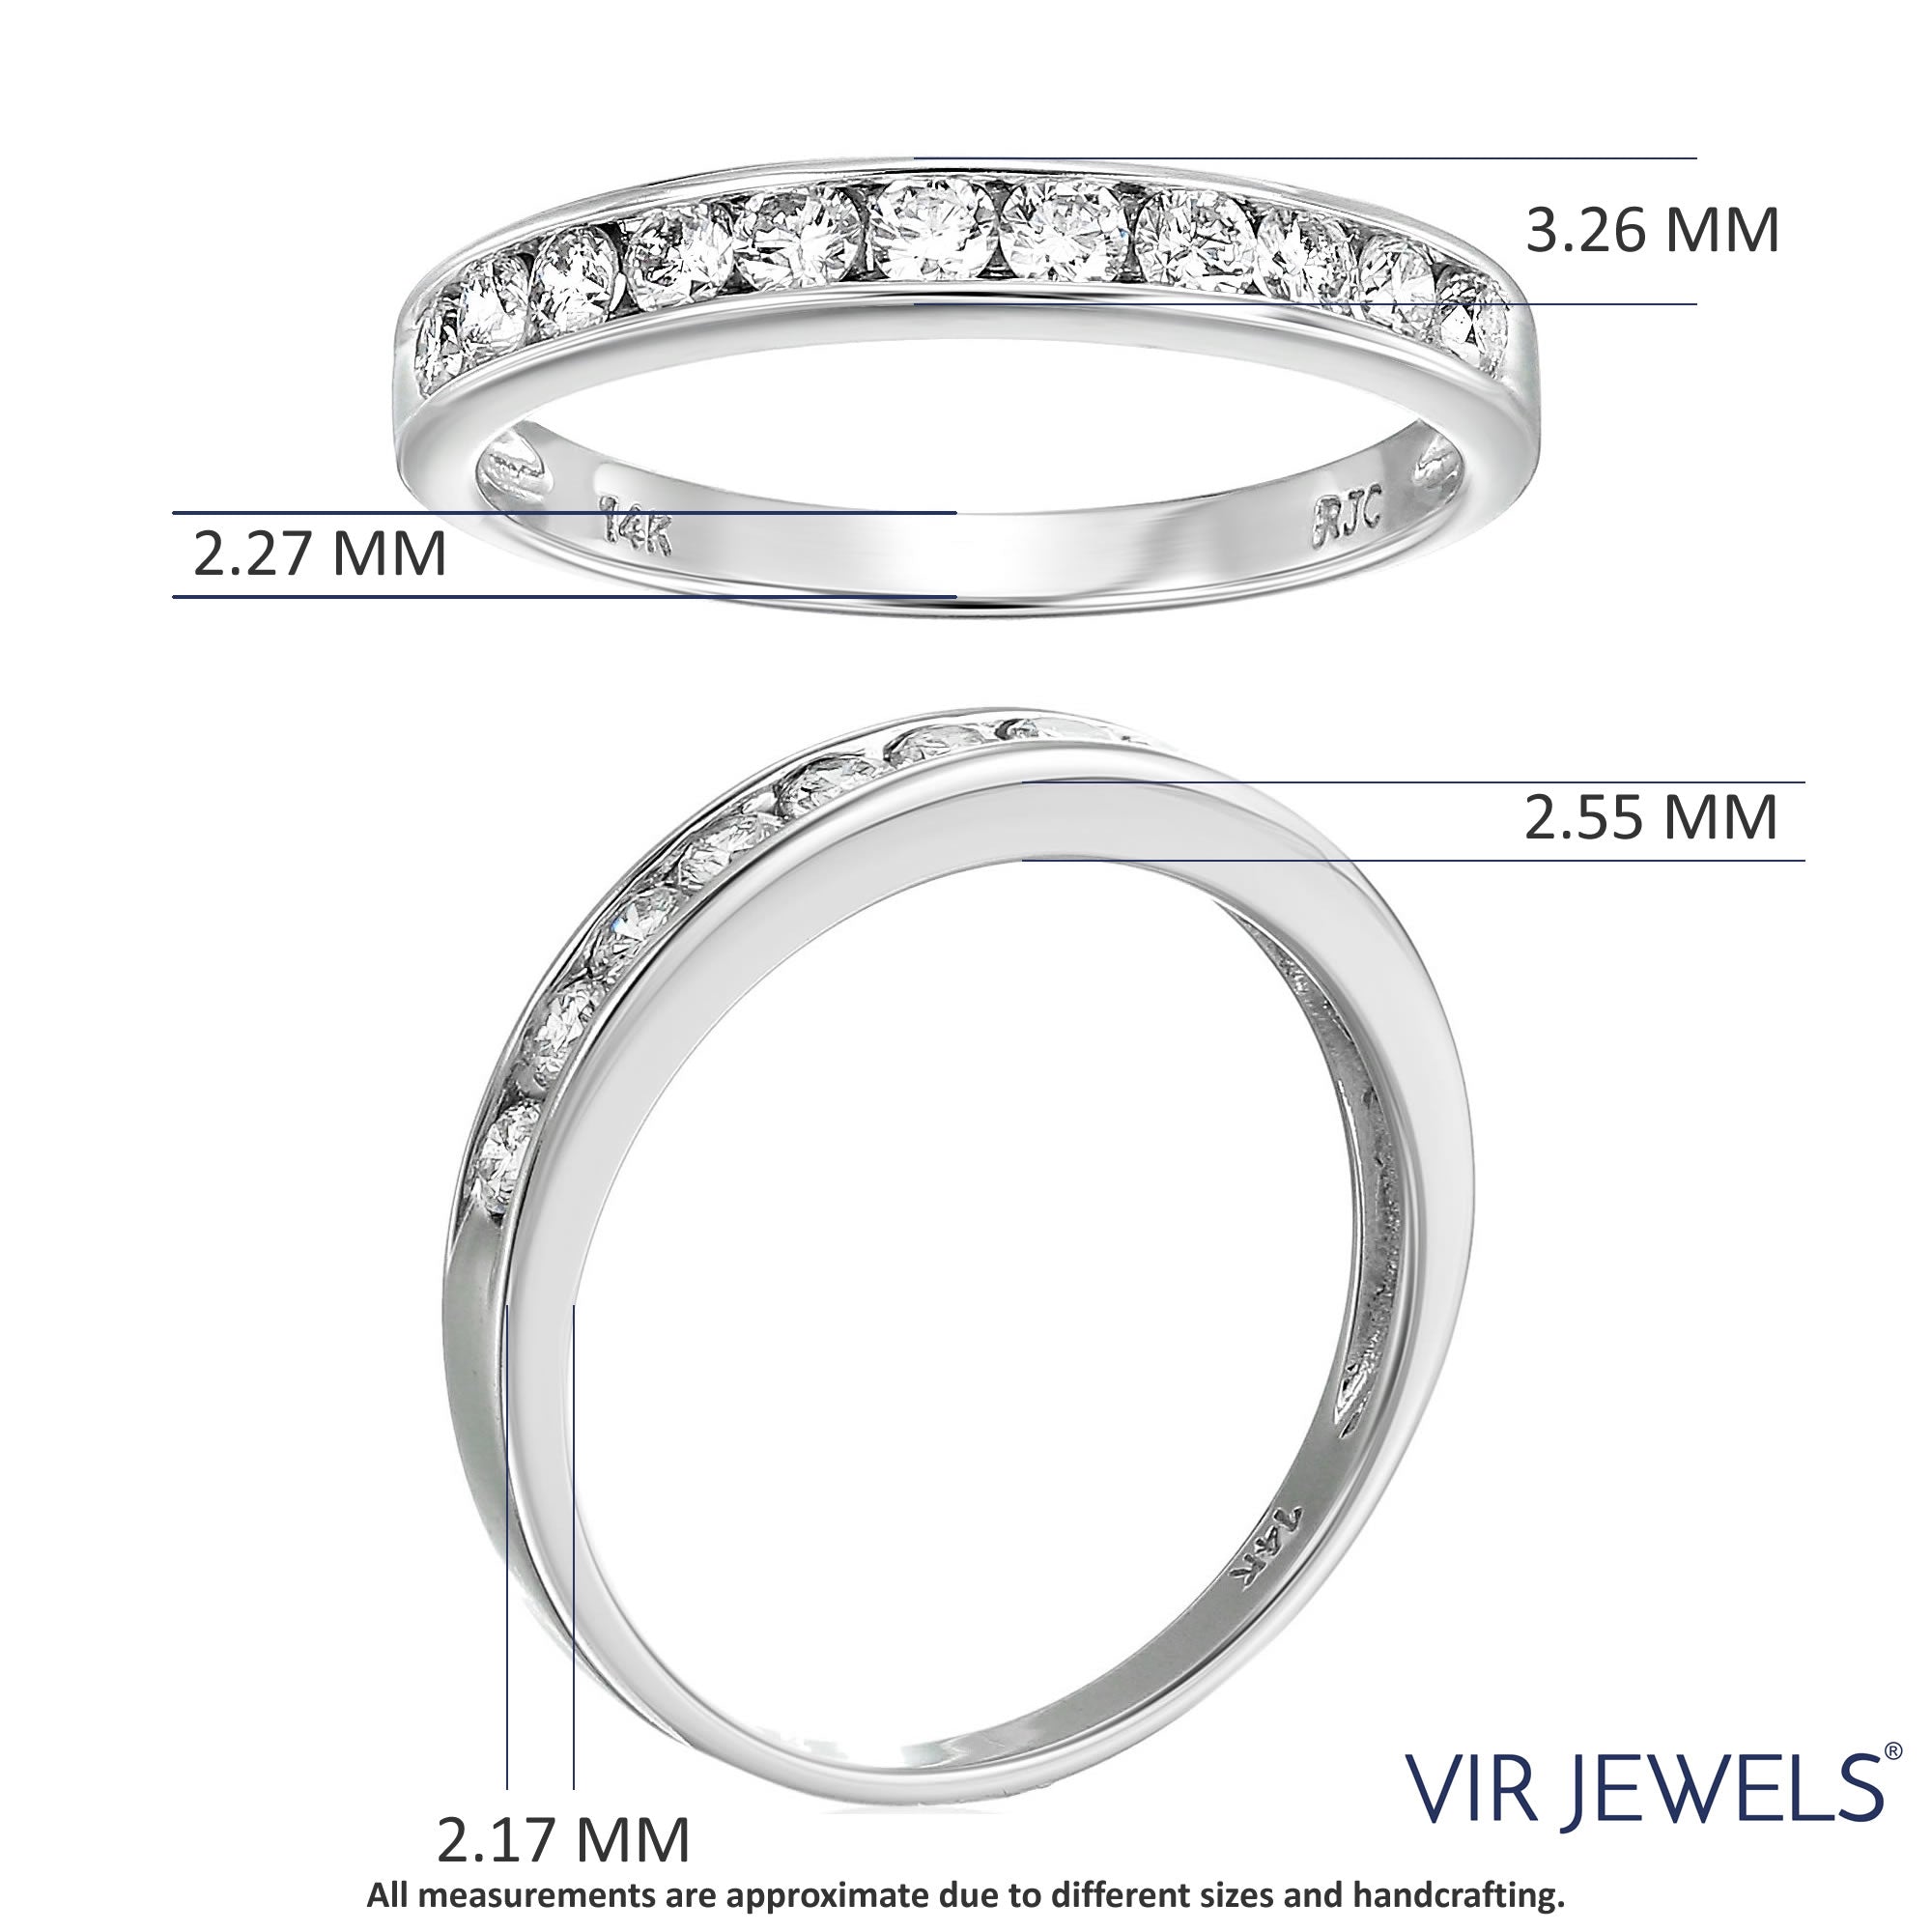 1/2 cttw Diamond Wedding Band For Women, Classic Diamond Wedding Band in 14K White Gold Channel Set, Size 4.5-10.25